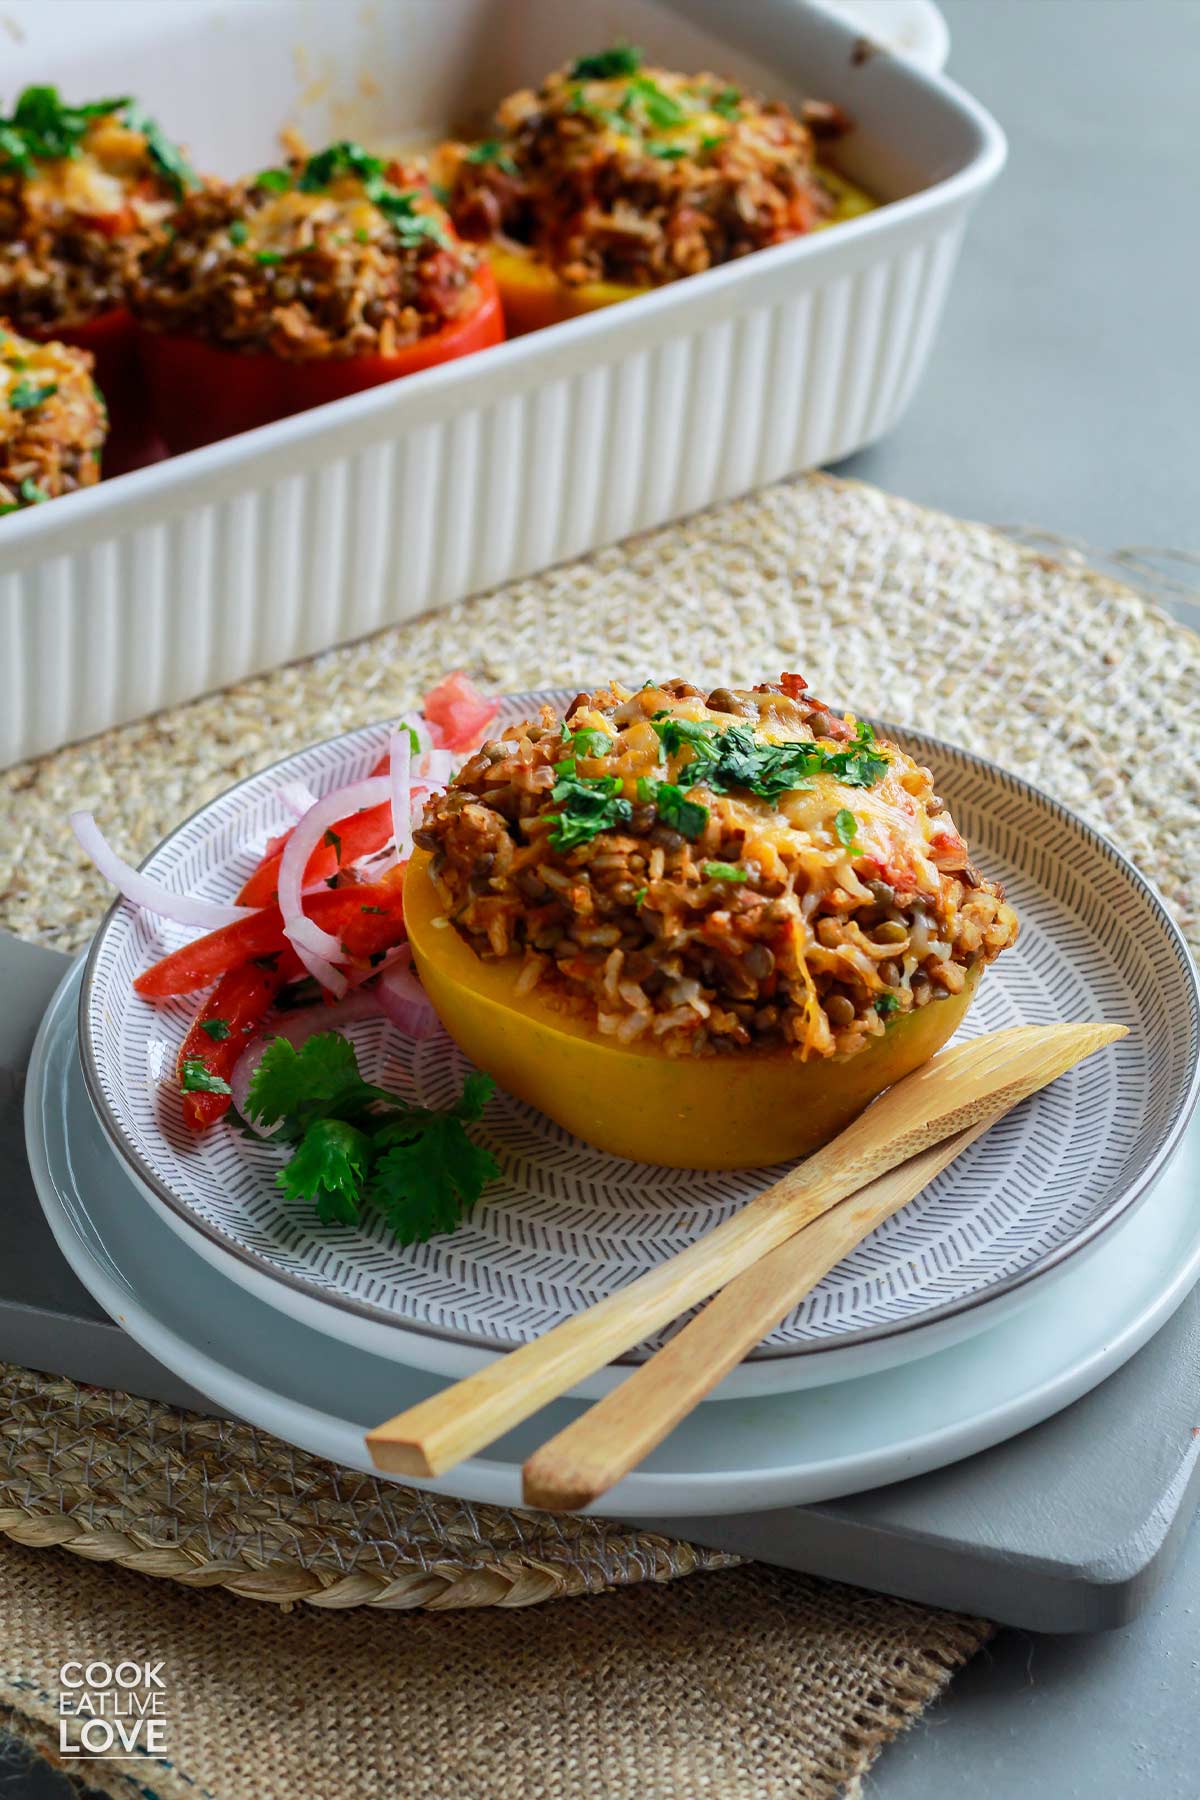 Brown rice and lentil stuffed peppers on a plate with a fork and knife.